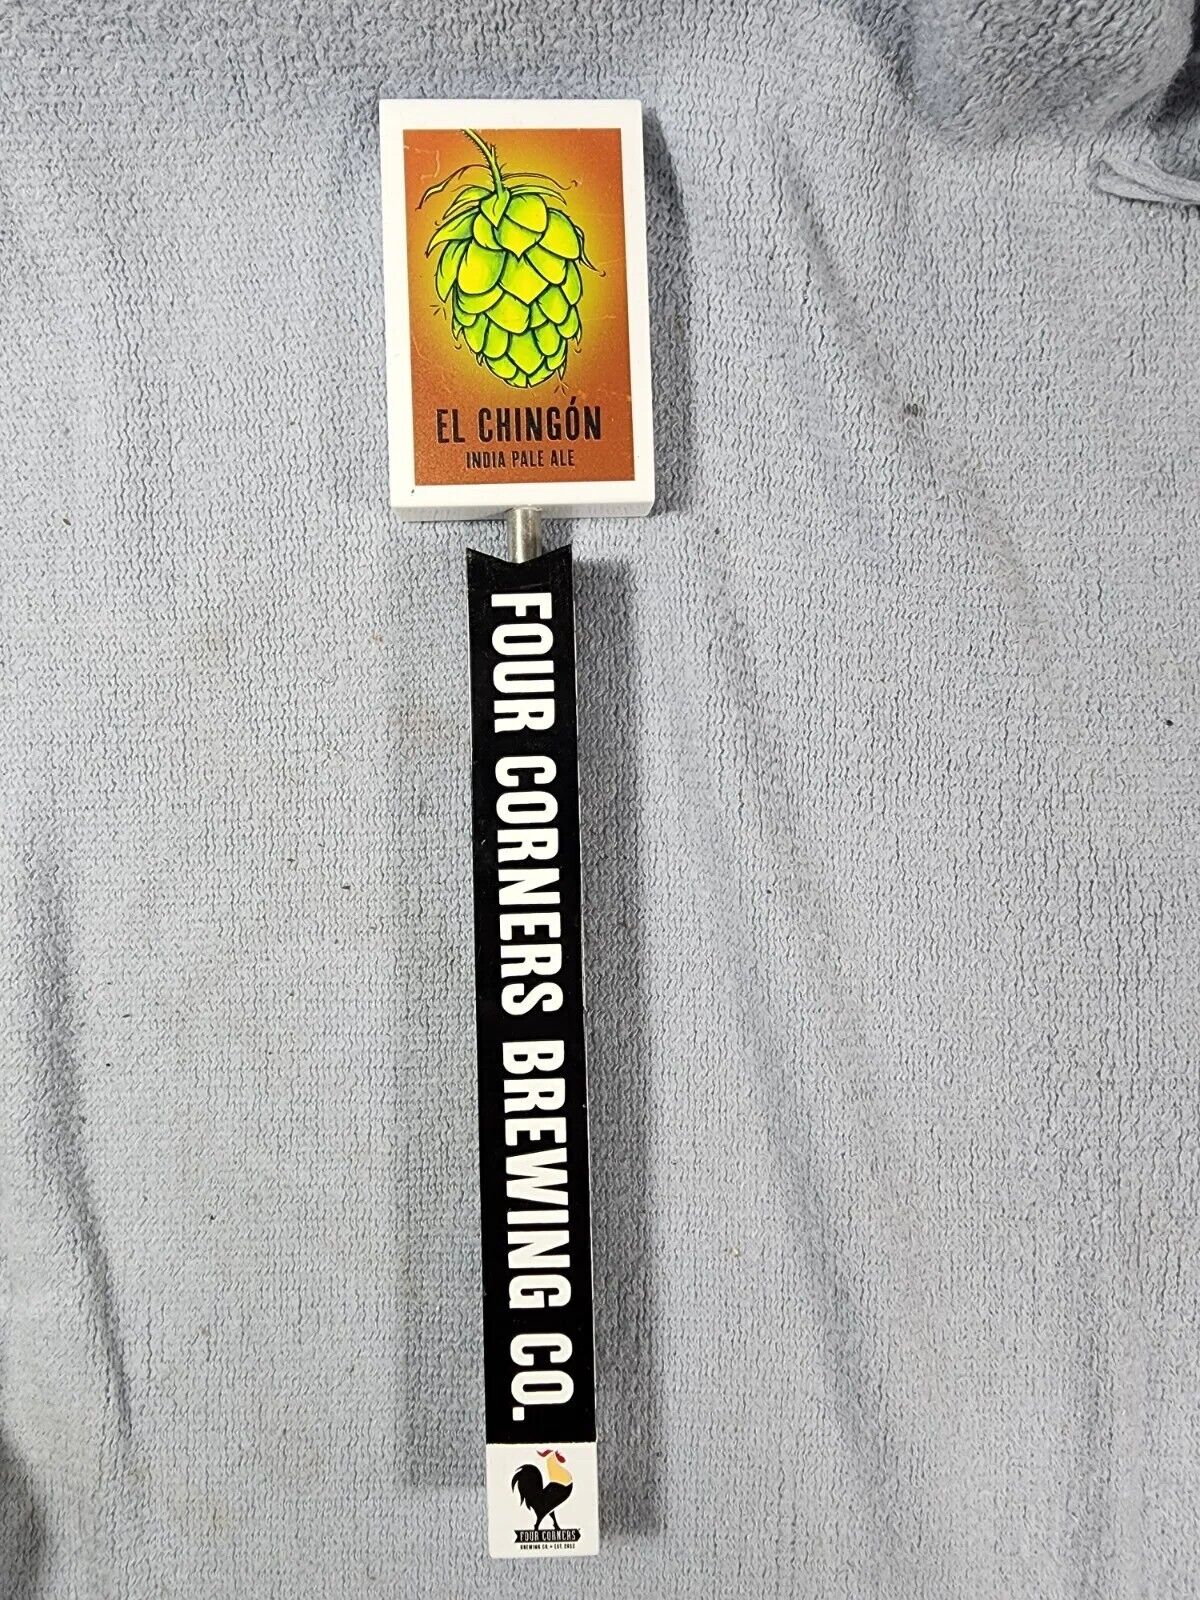 Four Corners Brewing El Chingon India pale Ale IPA Beer Tap Handle  FCBC TX